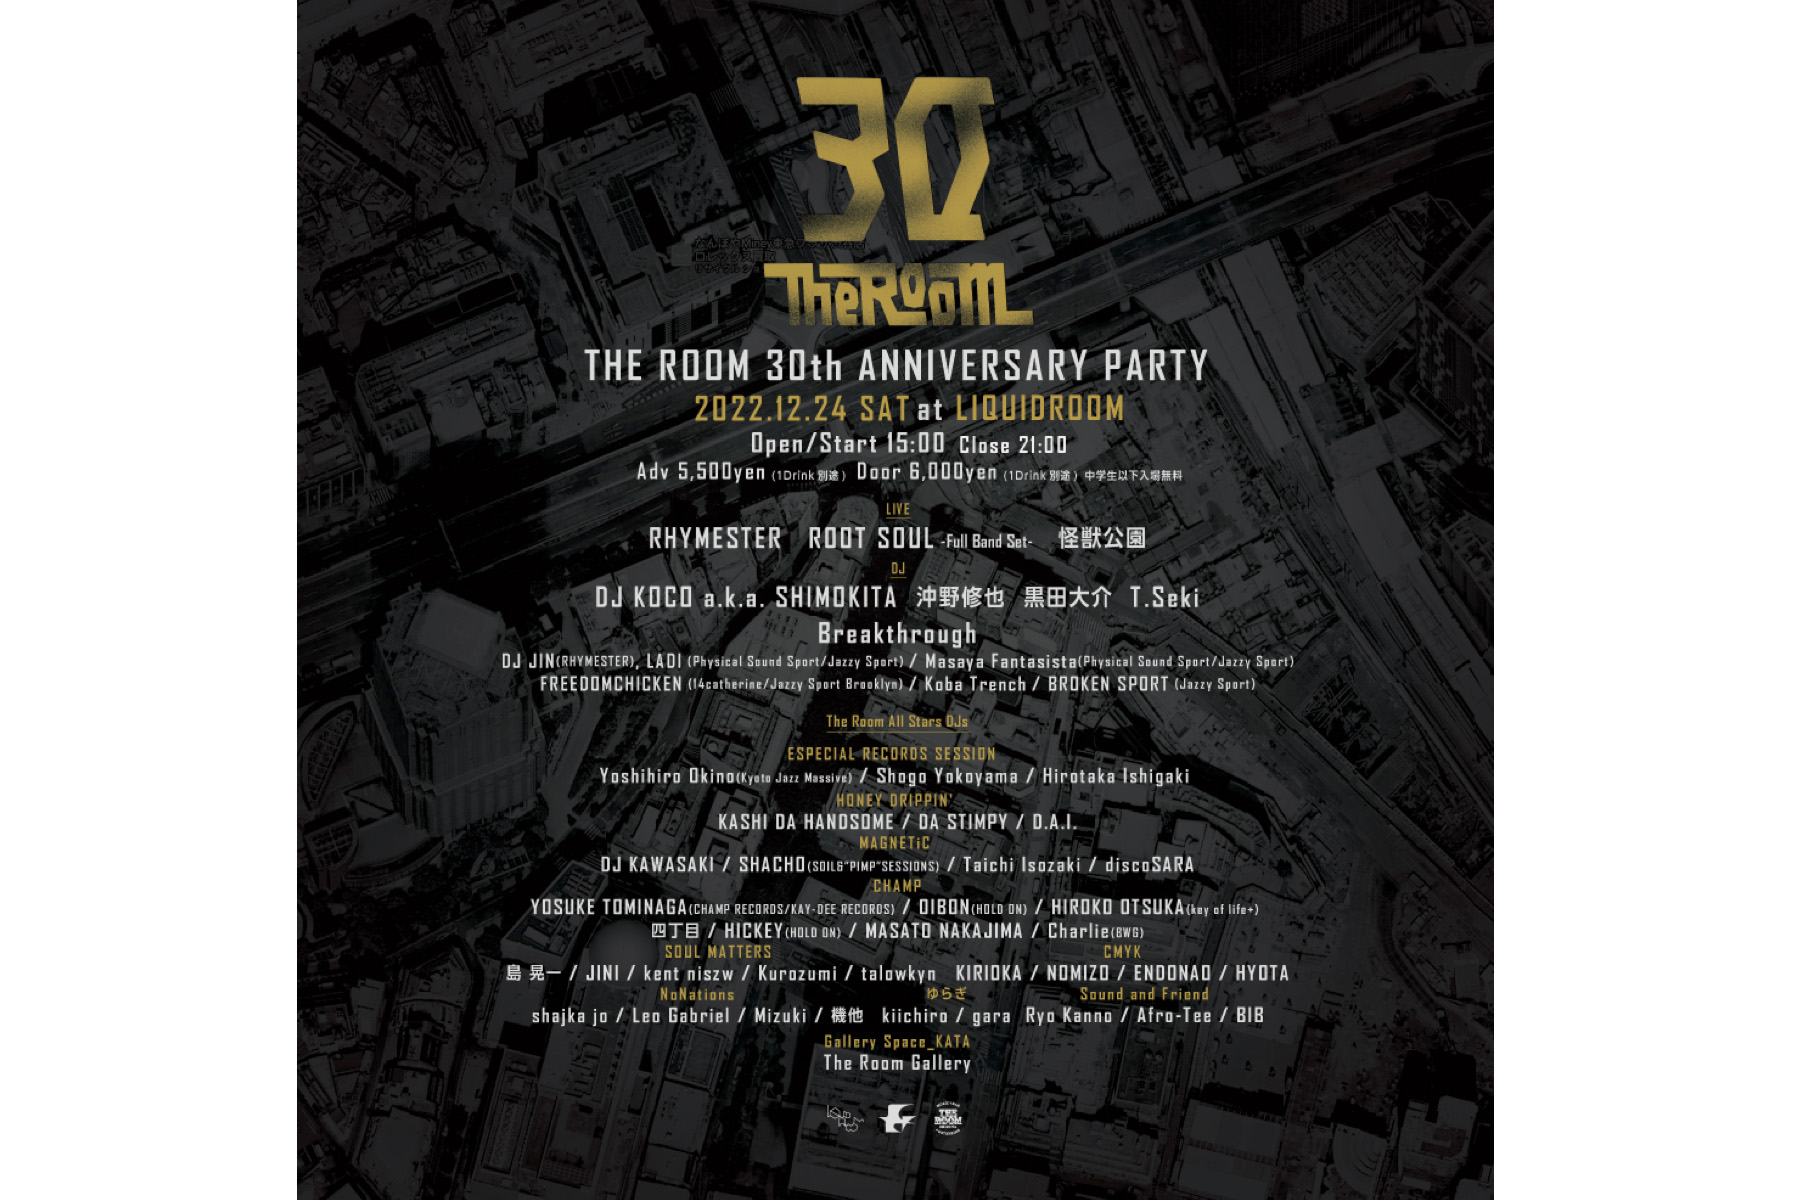 12.24 Sat. The Room 30th Anniversary Party